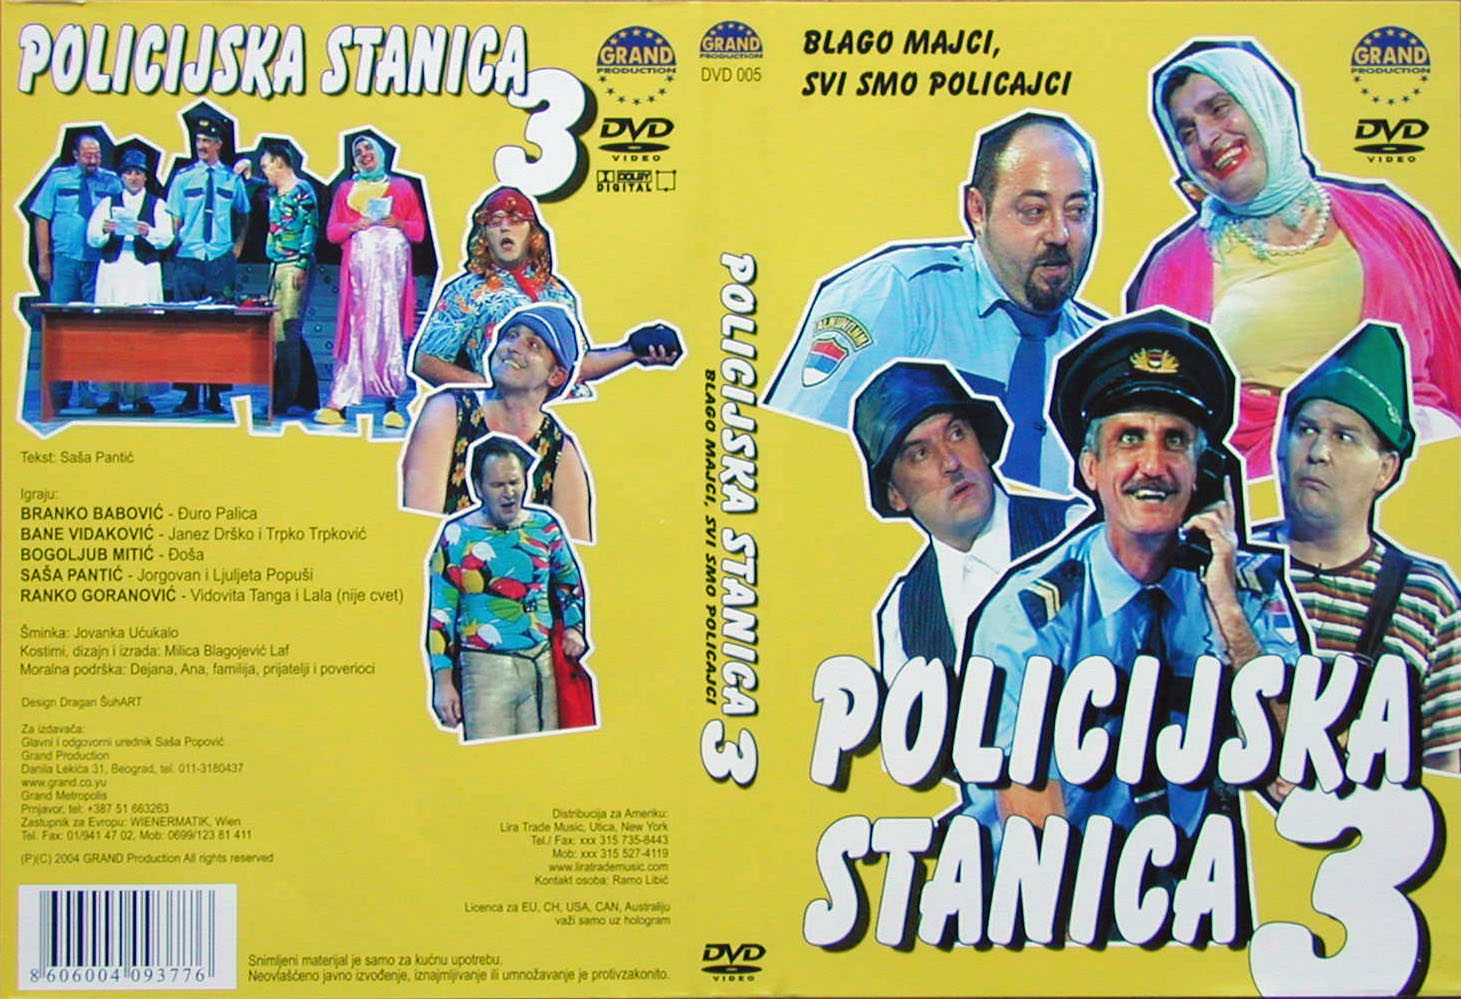 Click to view full size image -  DVD Cover - P - Policijska_stanica_3_-_prednja_zadnja - Policijska_stanica_3_-_prednja_zadnja.jpg